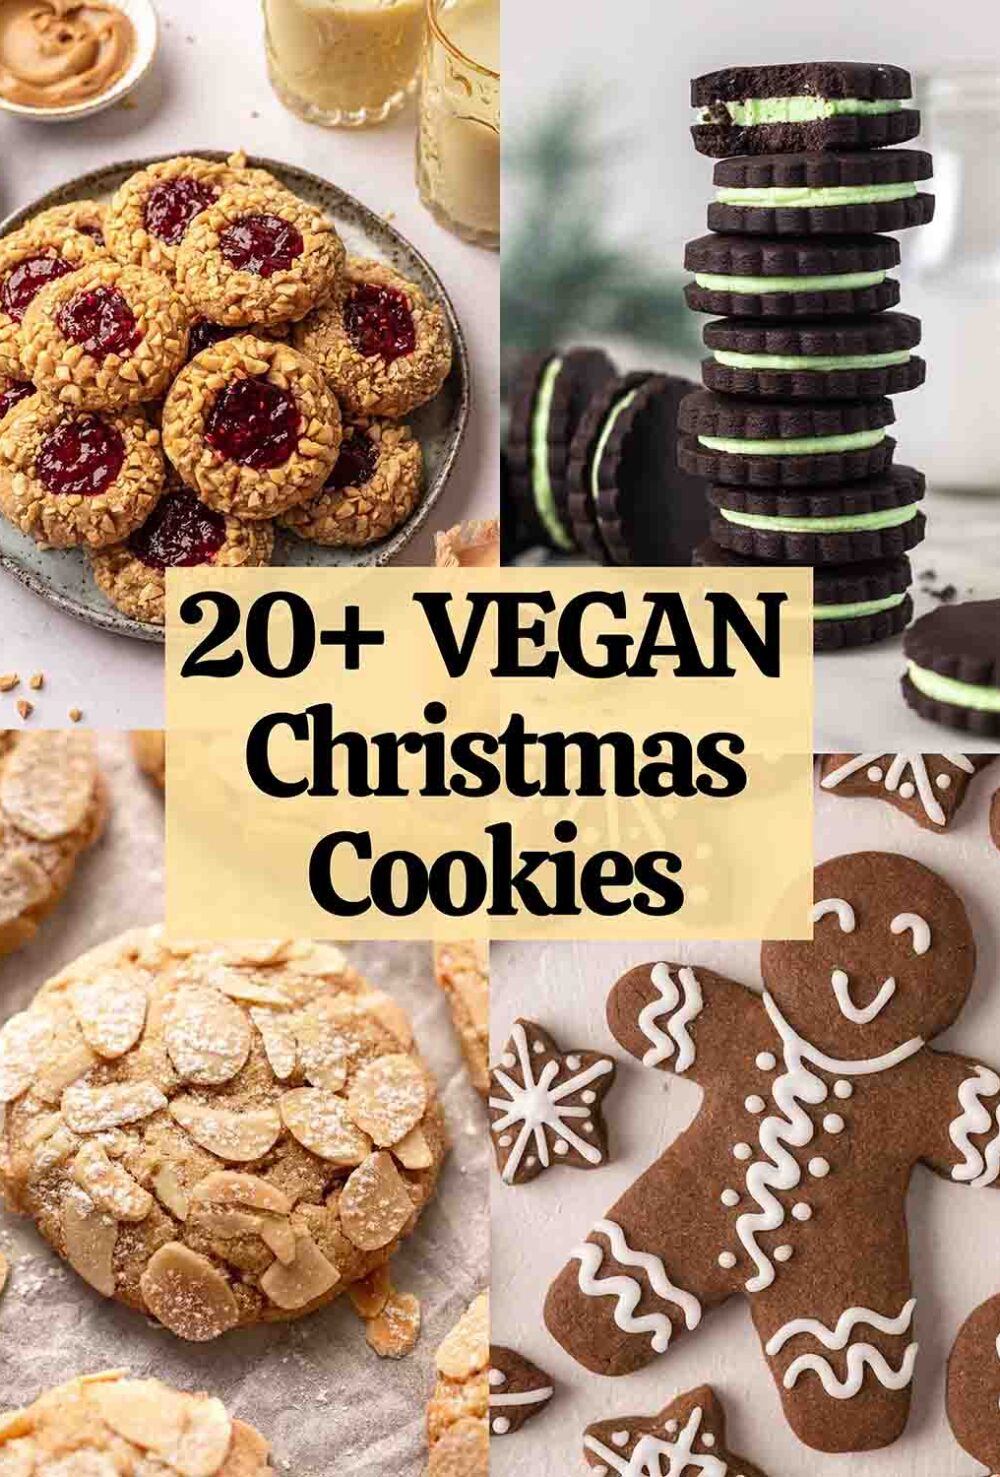 Collage of christmas cookies with text overlay that says '20+ vegan Christmas cookies'.